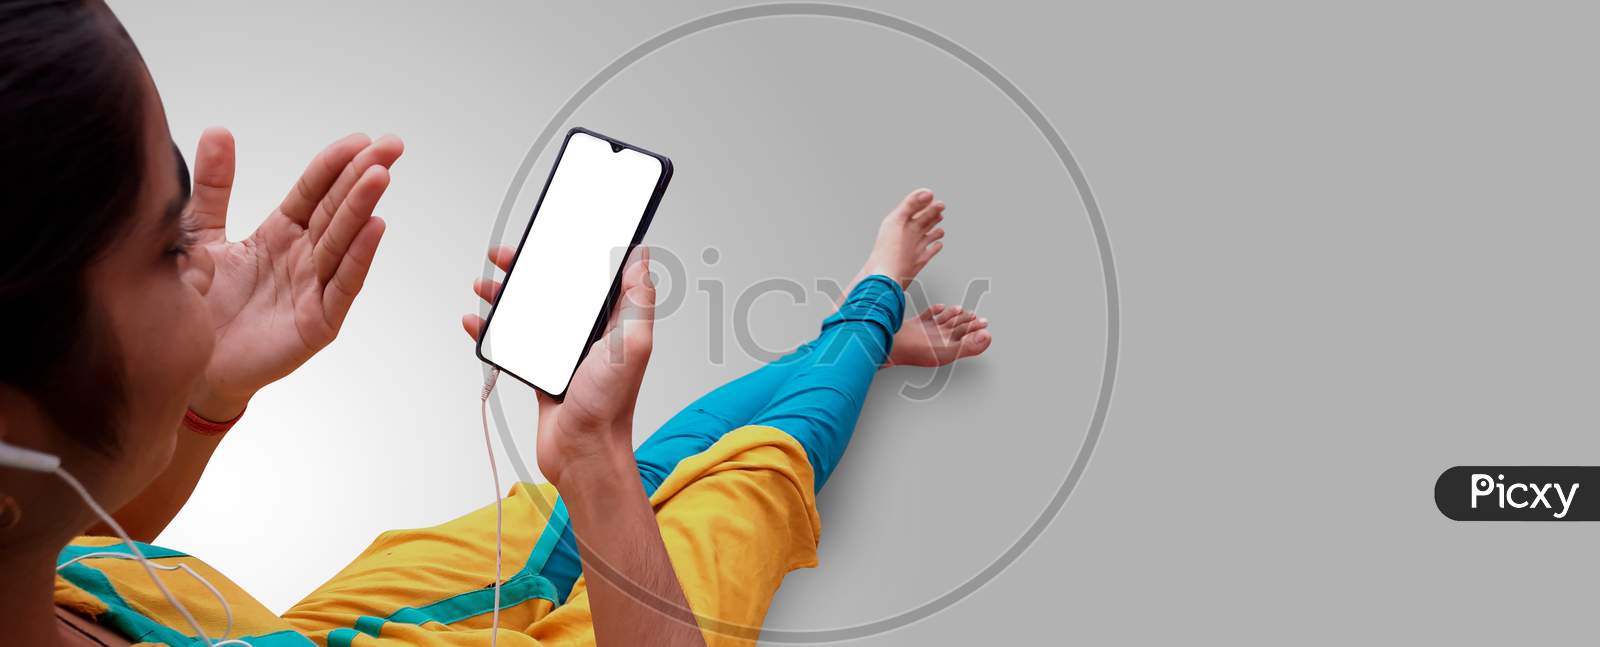 Girl Watching Mobile Phone With Hand Gestures And Wearing Earphone Mockup